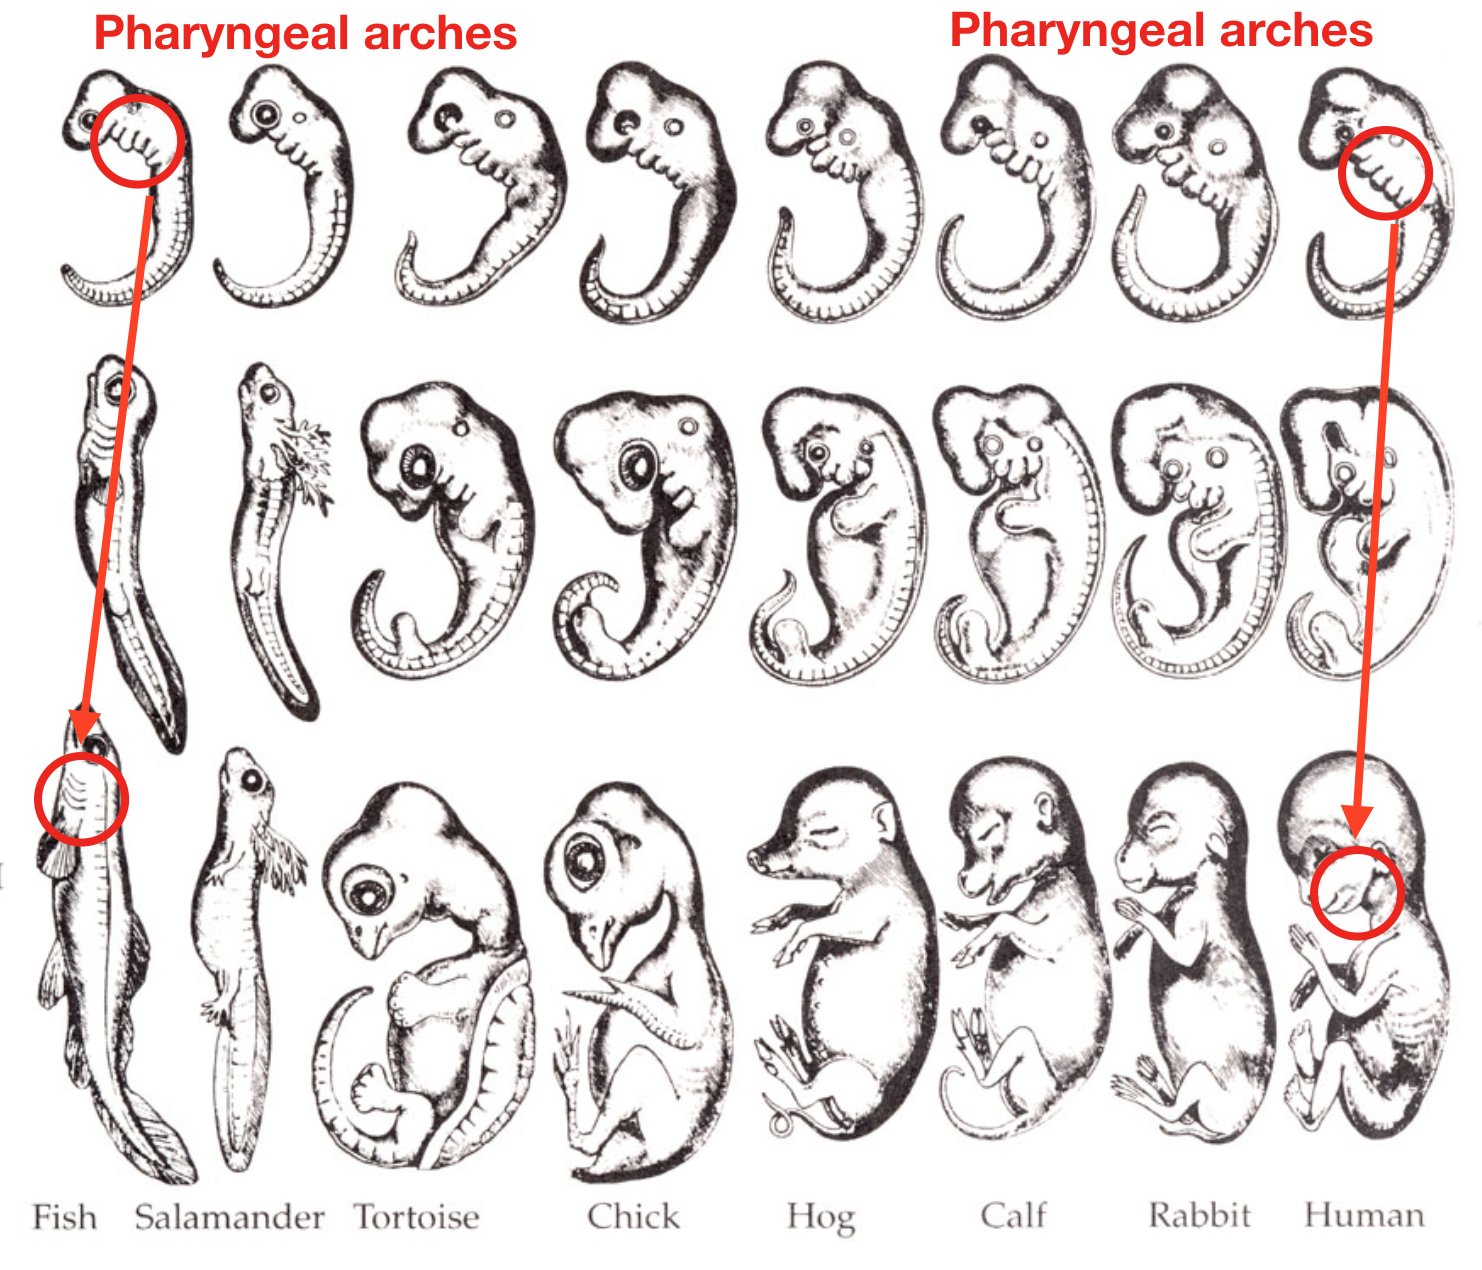 High Seas Science on X: So most obvi place: necks. This is legit the best  place from an evolution and development perspective. The gills of a fish &  your jaw, hyoid bone